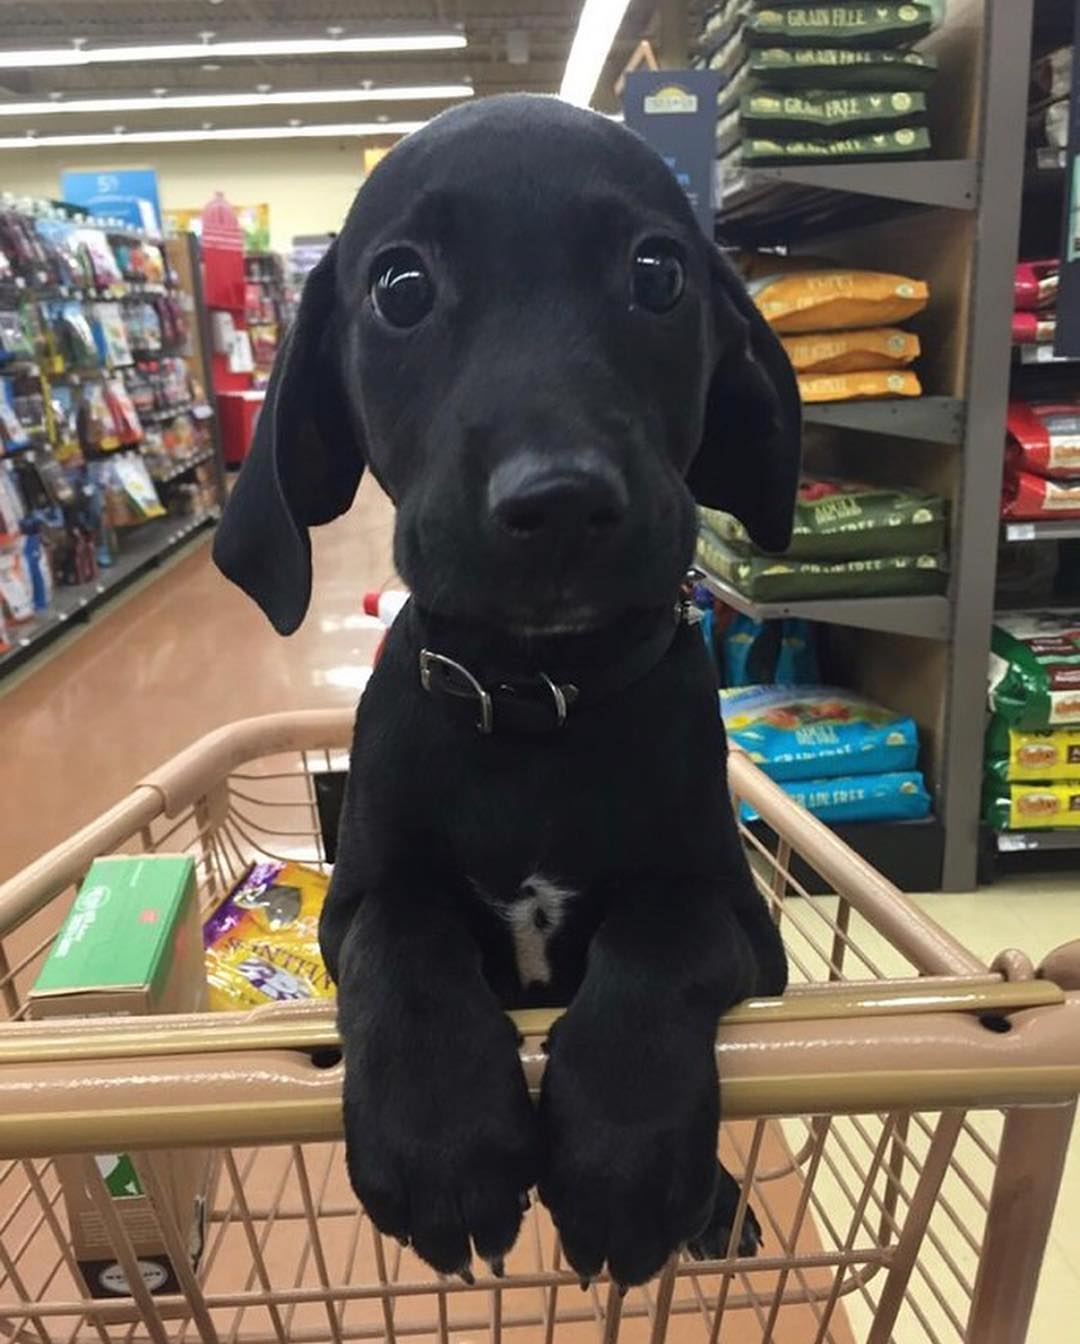 I think we’re gonna need more treats